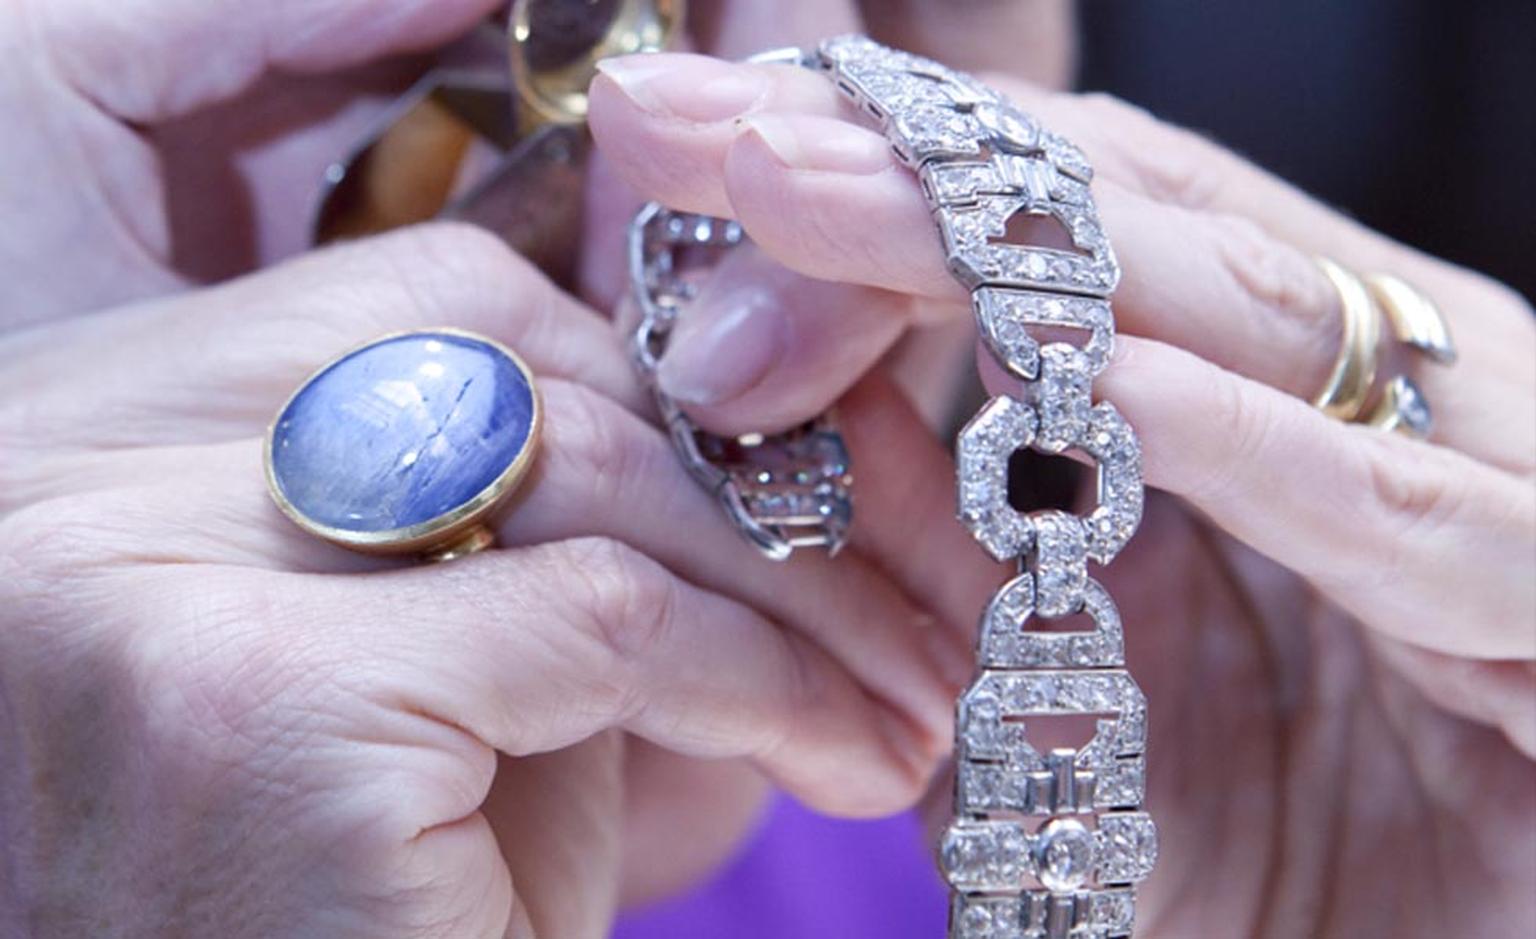 Understanding the origins and value of jewels is ex-Sotheby's jewellery expert Joanna Hardy's area of expertise